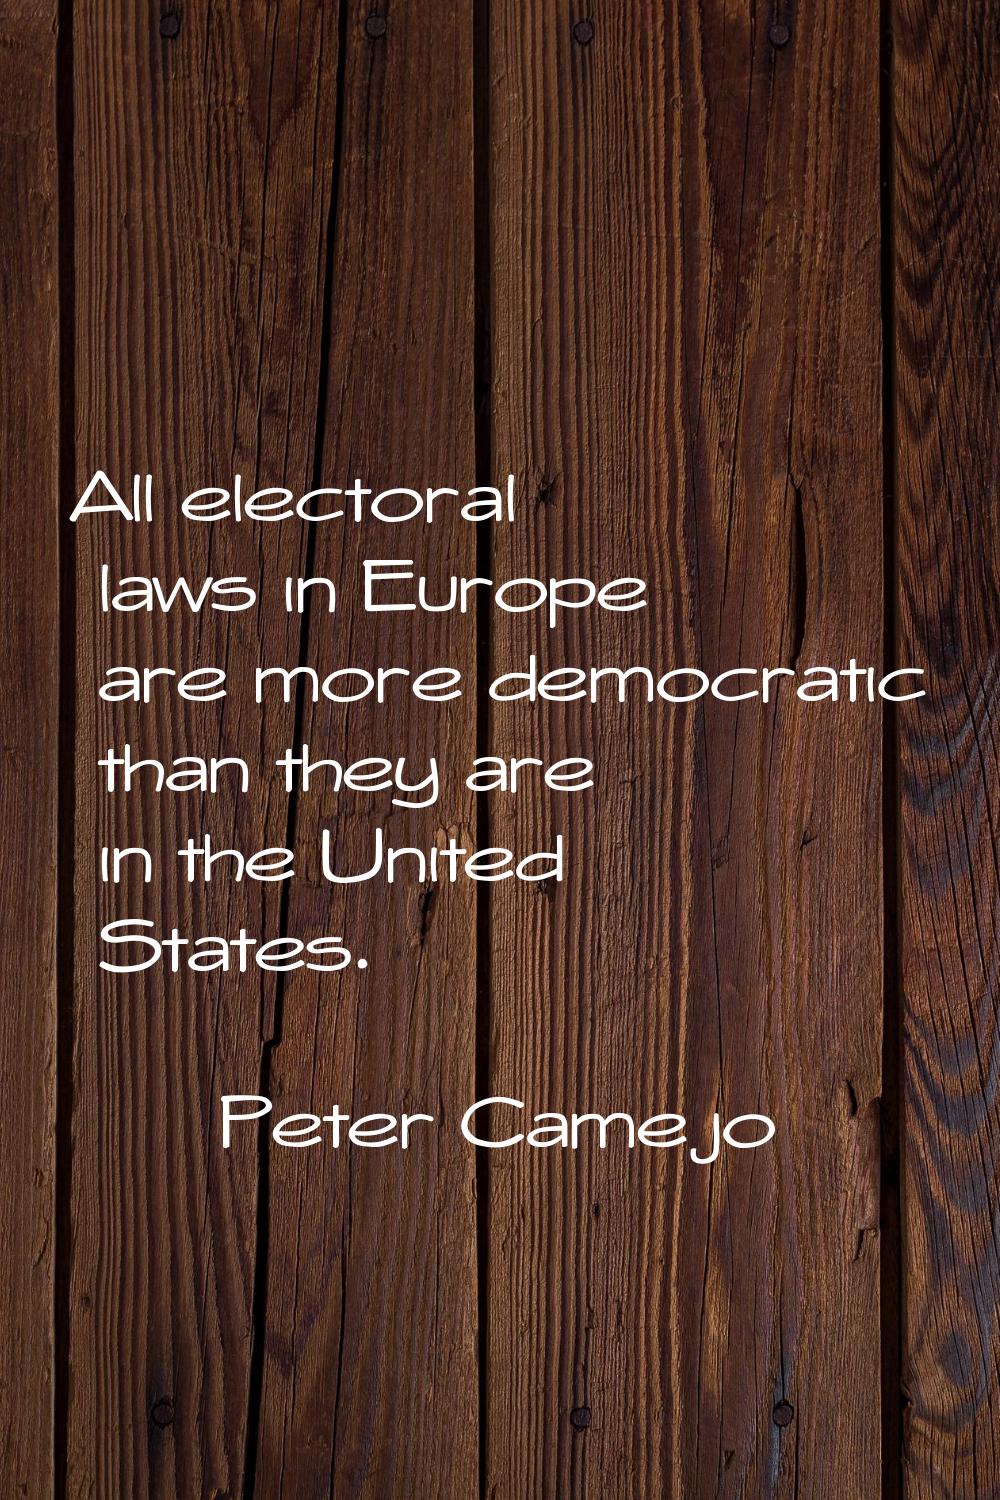 All electoral laws in Europe are more democratic than they are in the United States.